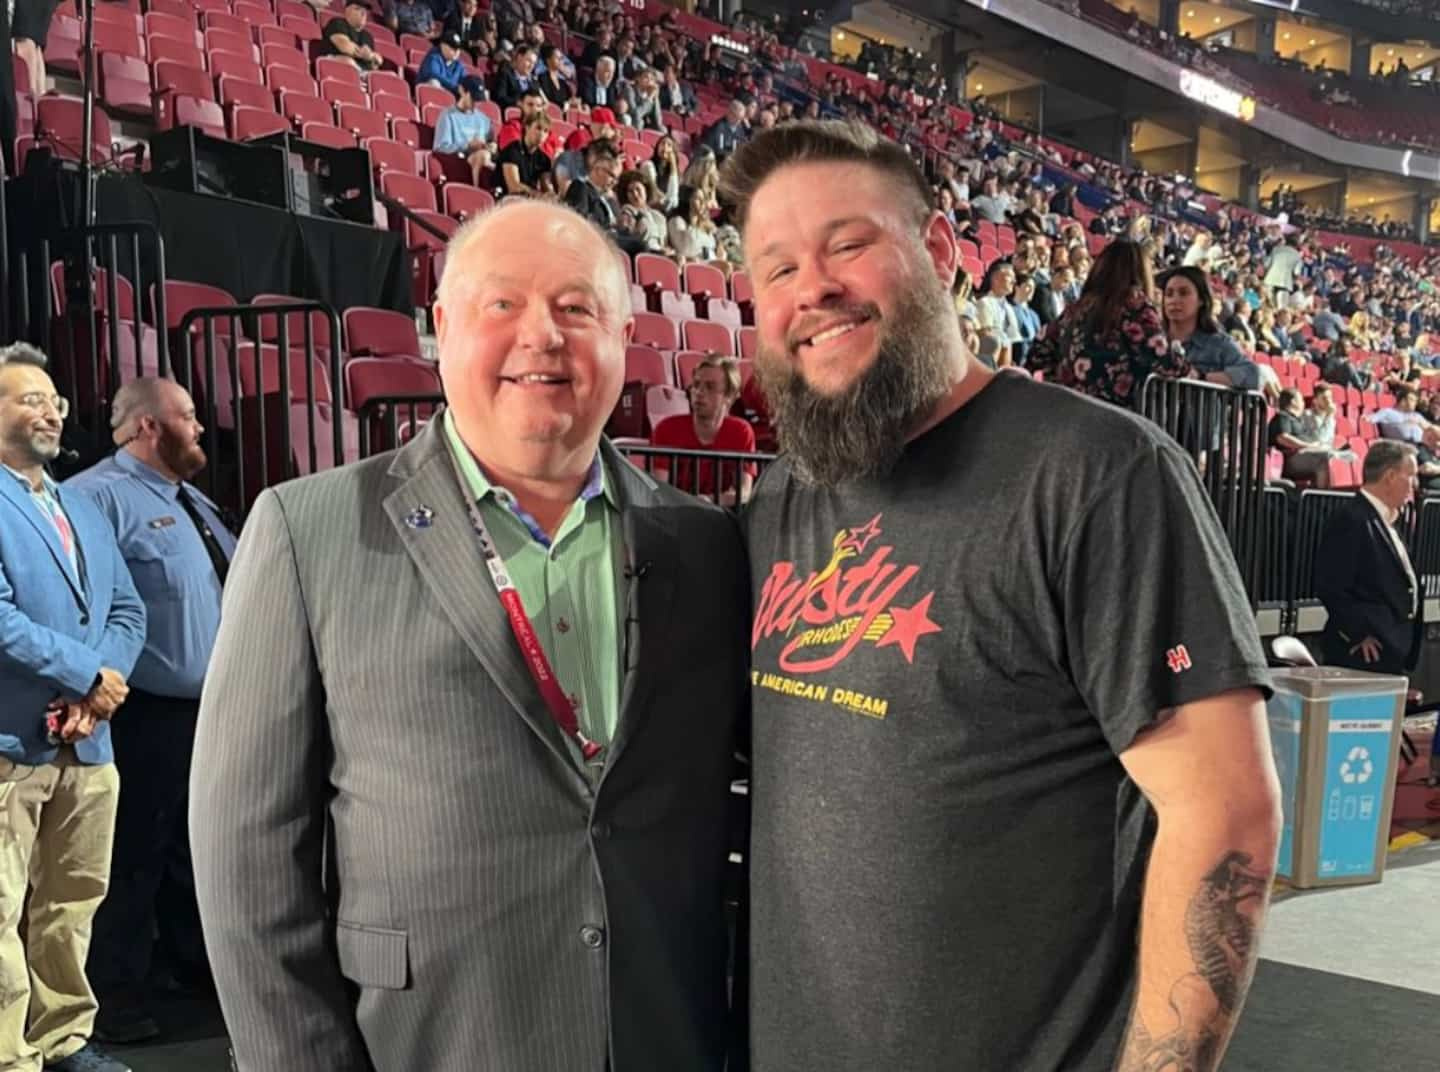 A well-known guest in Quebec surprises Bruce Boudreau